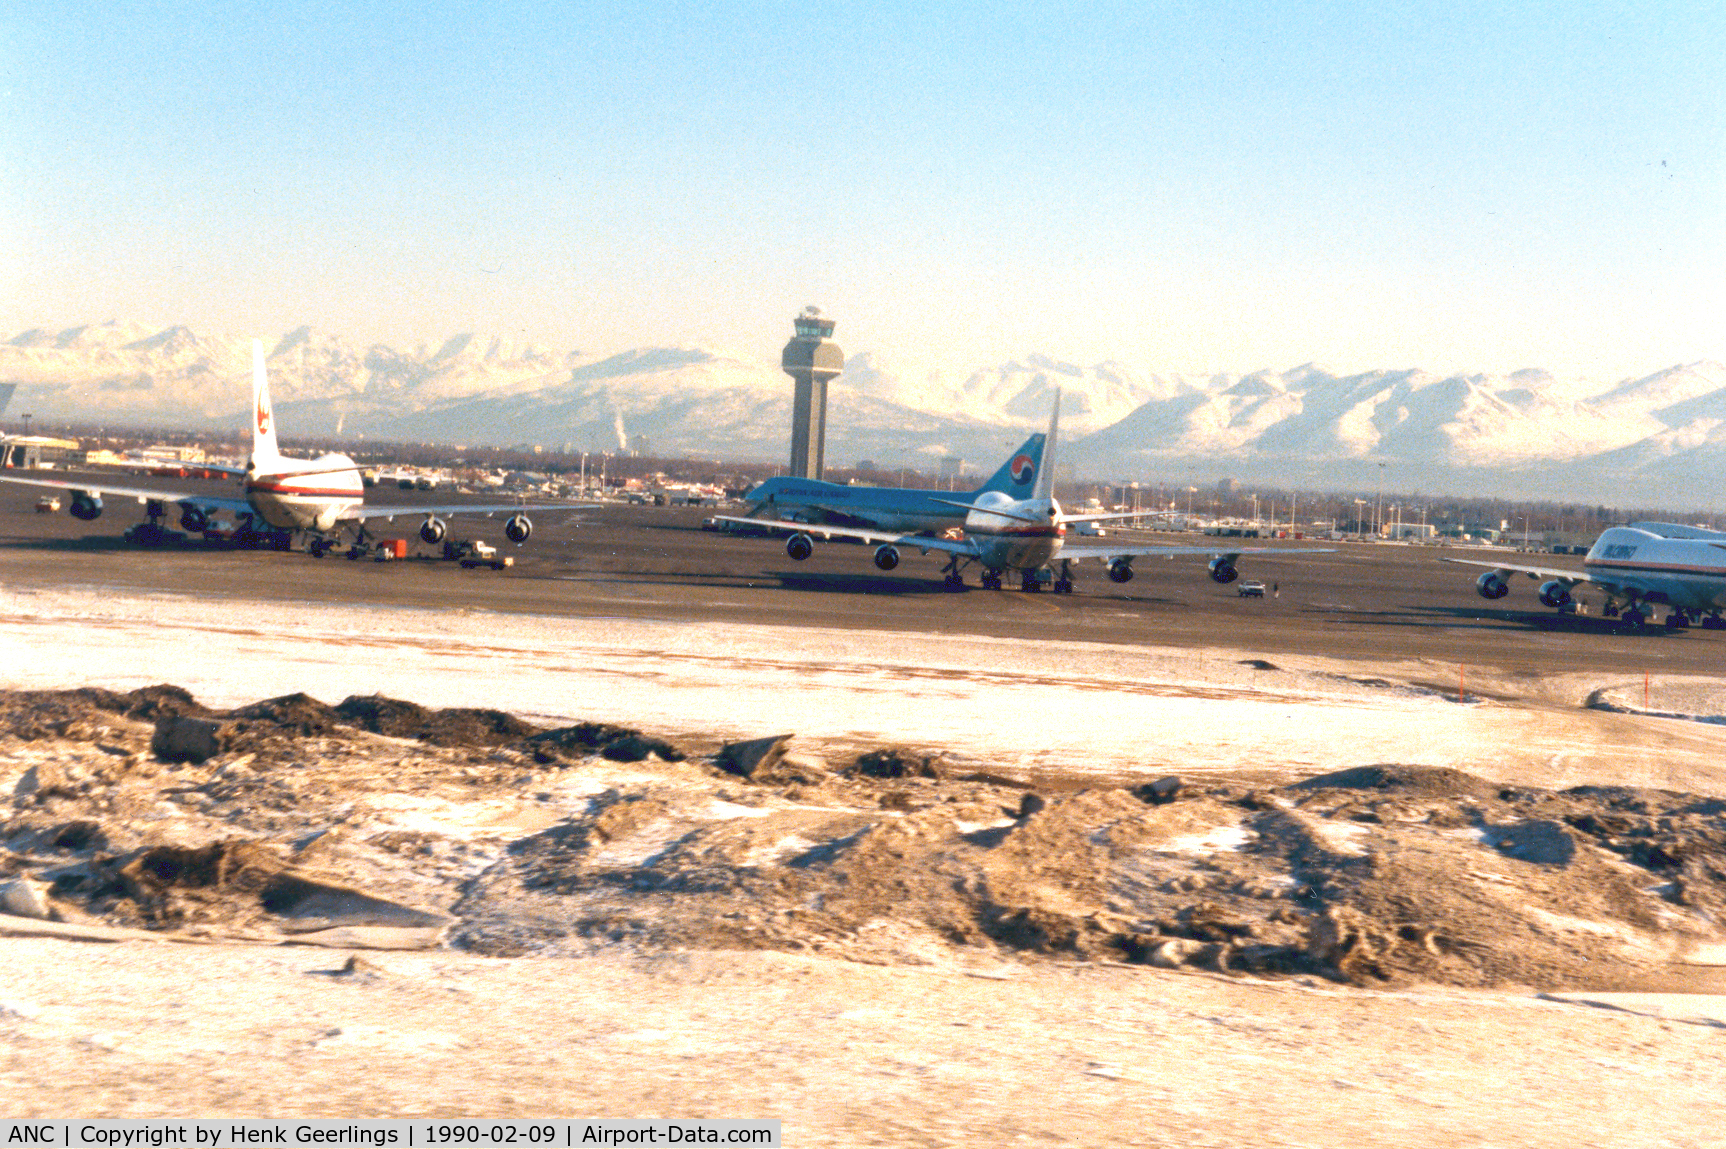 Ted Stevens Anchorage International Airport (ANC) - Landing at ANC , Feb 1990